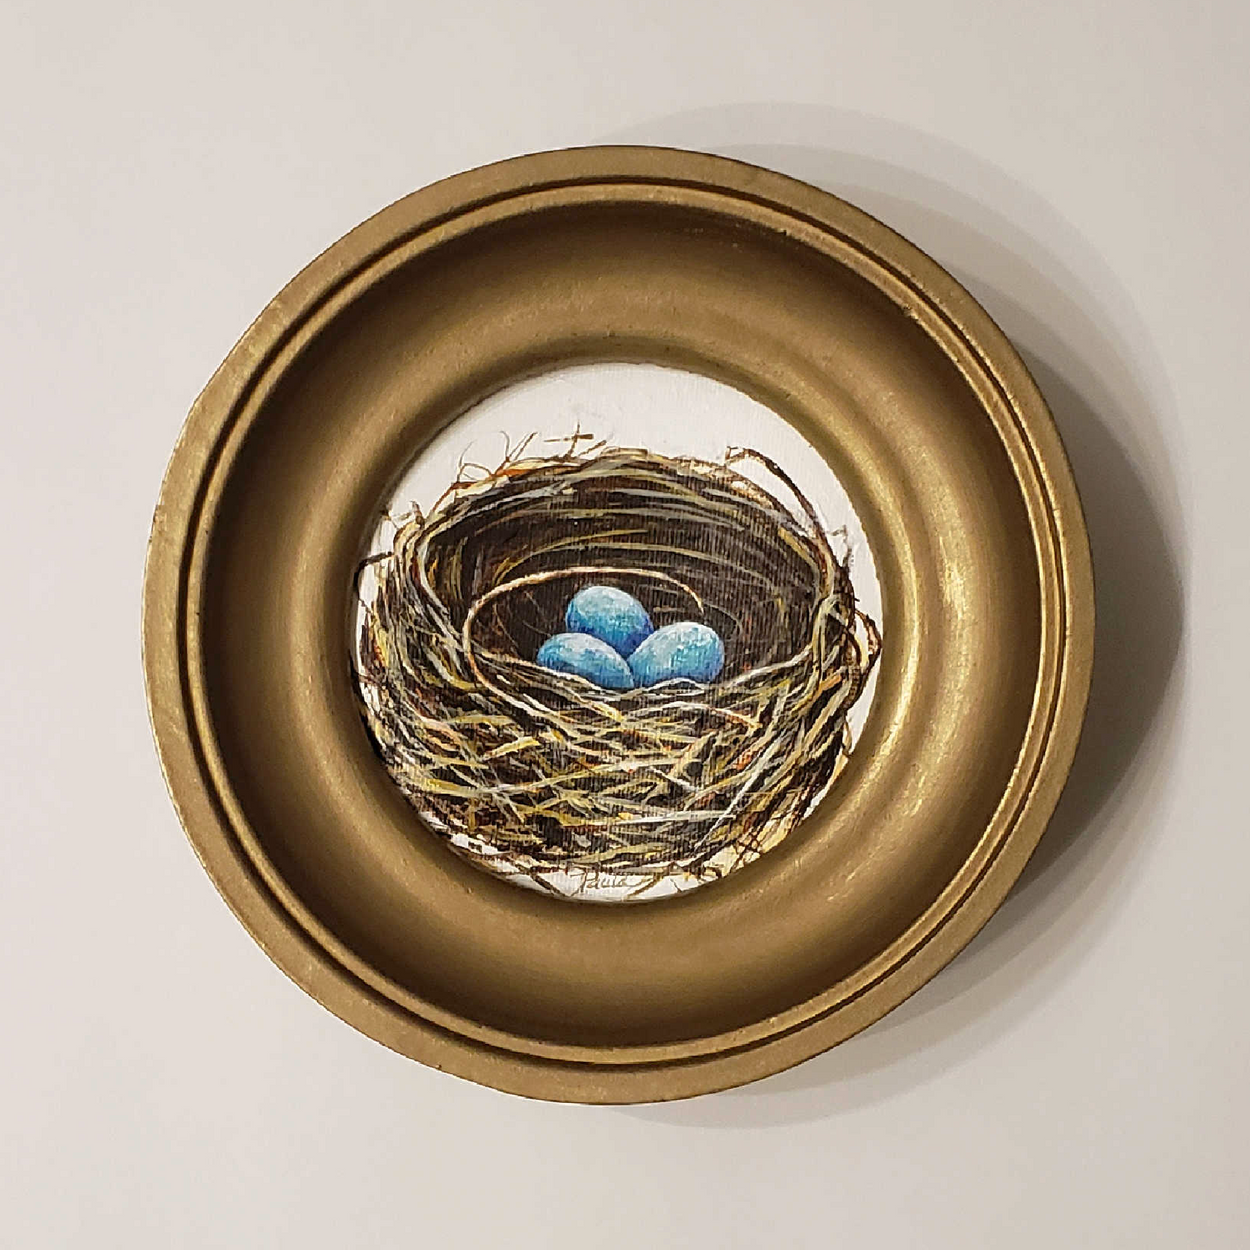 The sweetest little birds nest painted with browns and golds and three aqua eggs. Framed in a vintage style gold frame ... 6 inches round.